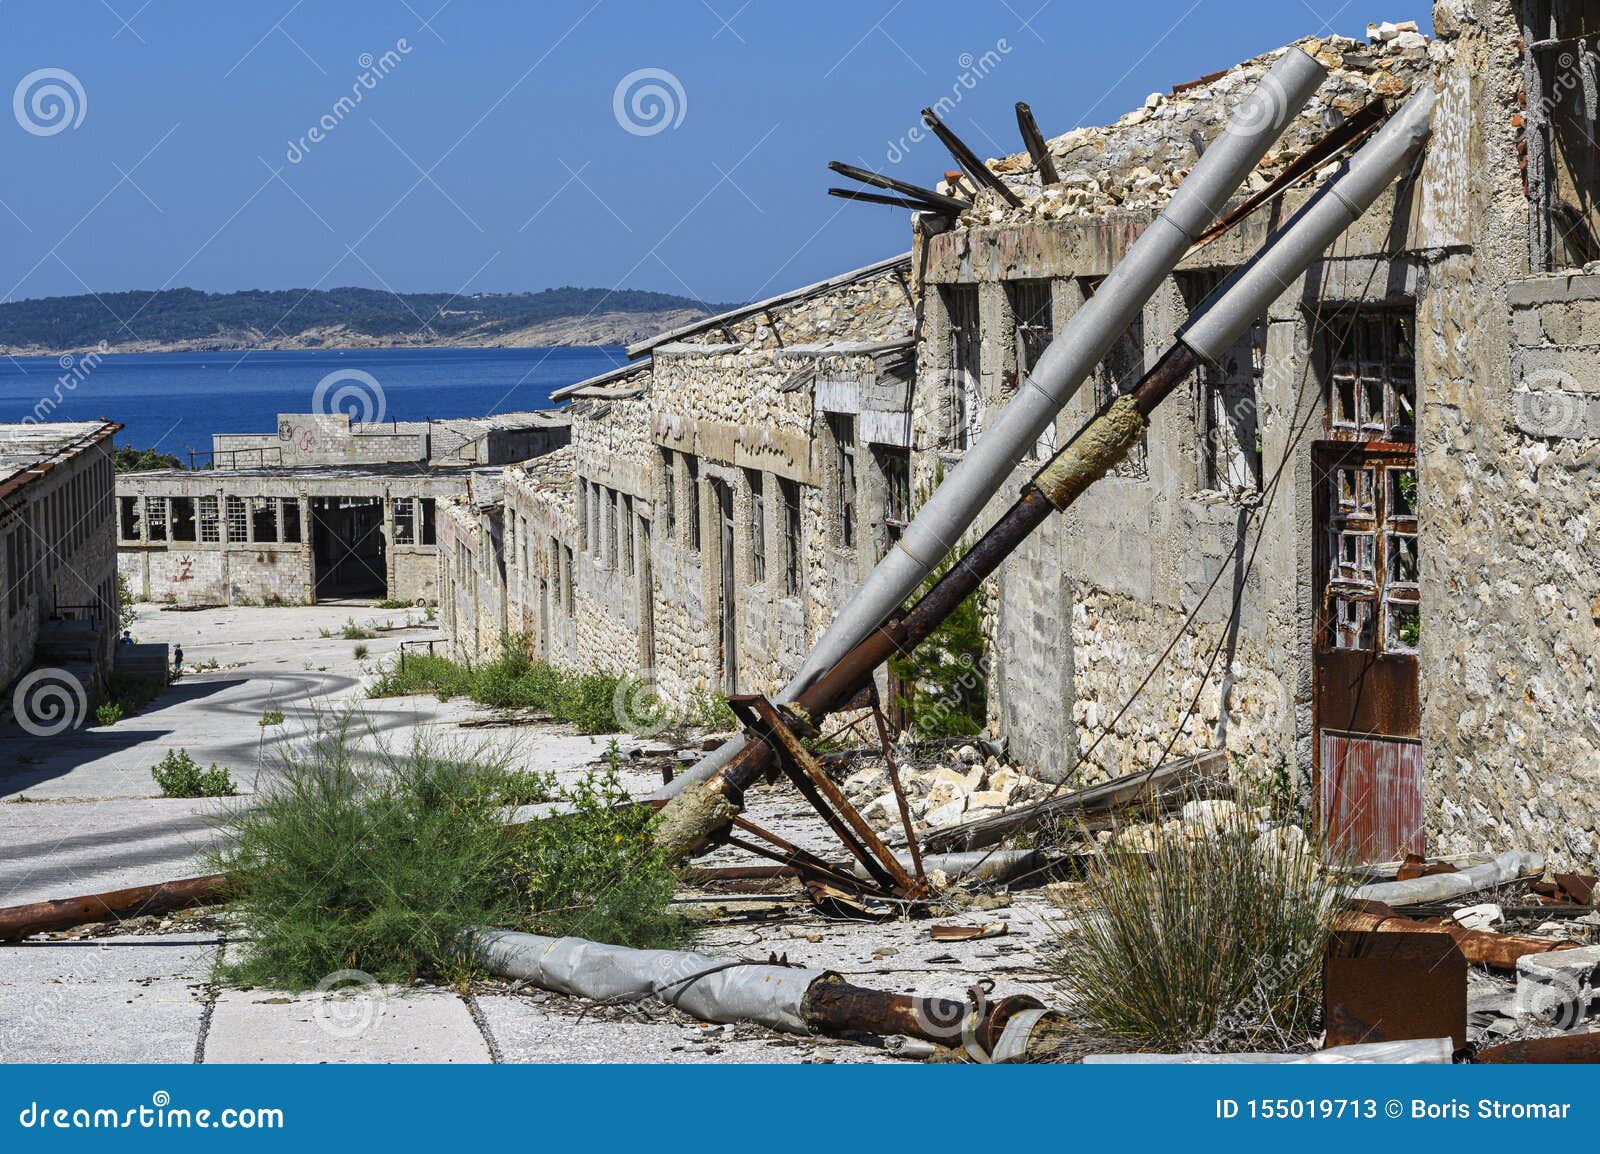 Goli victims otok number of in What does